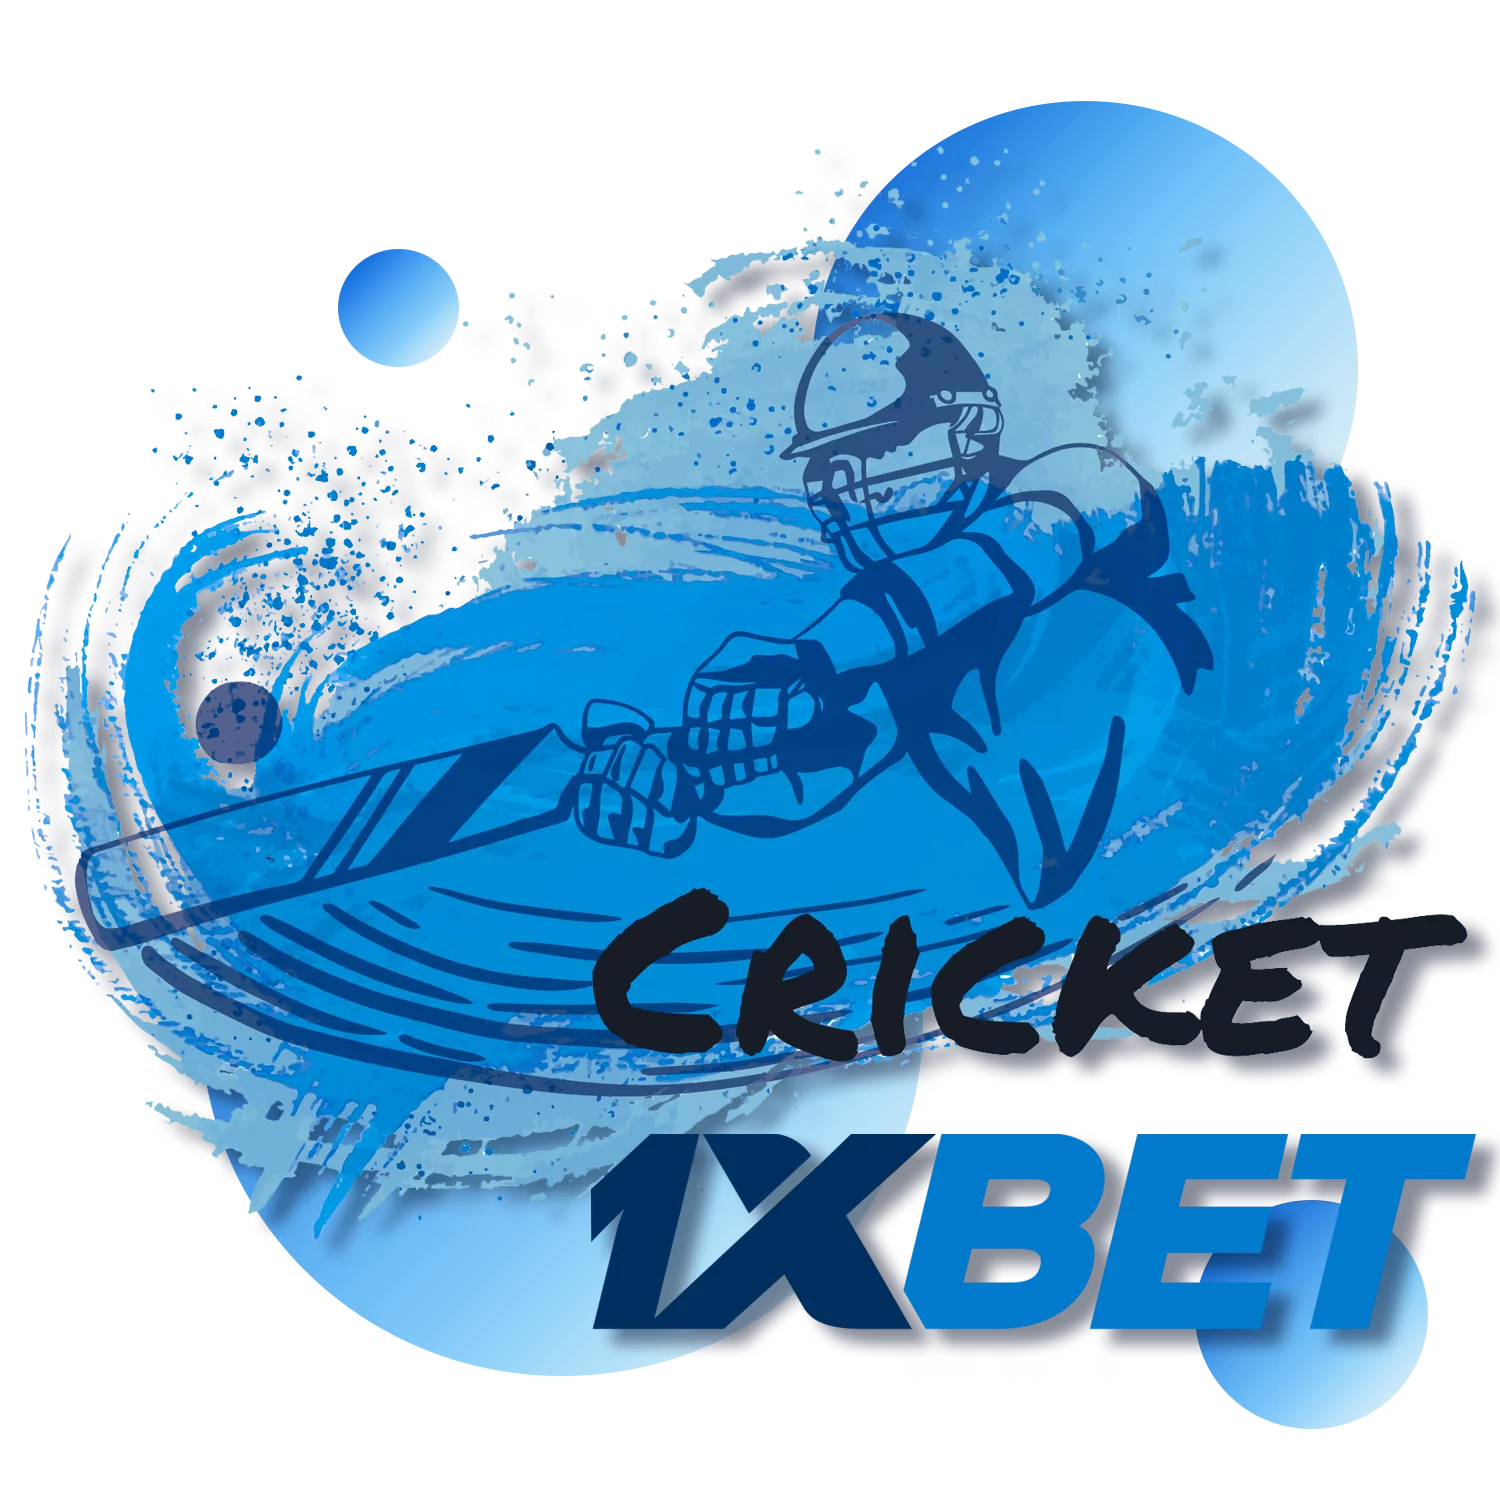 From this article, you learn about cricket betting on 1xbet.